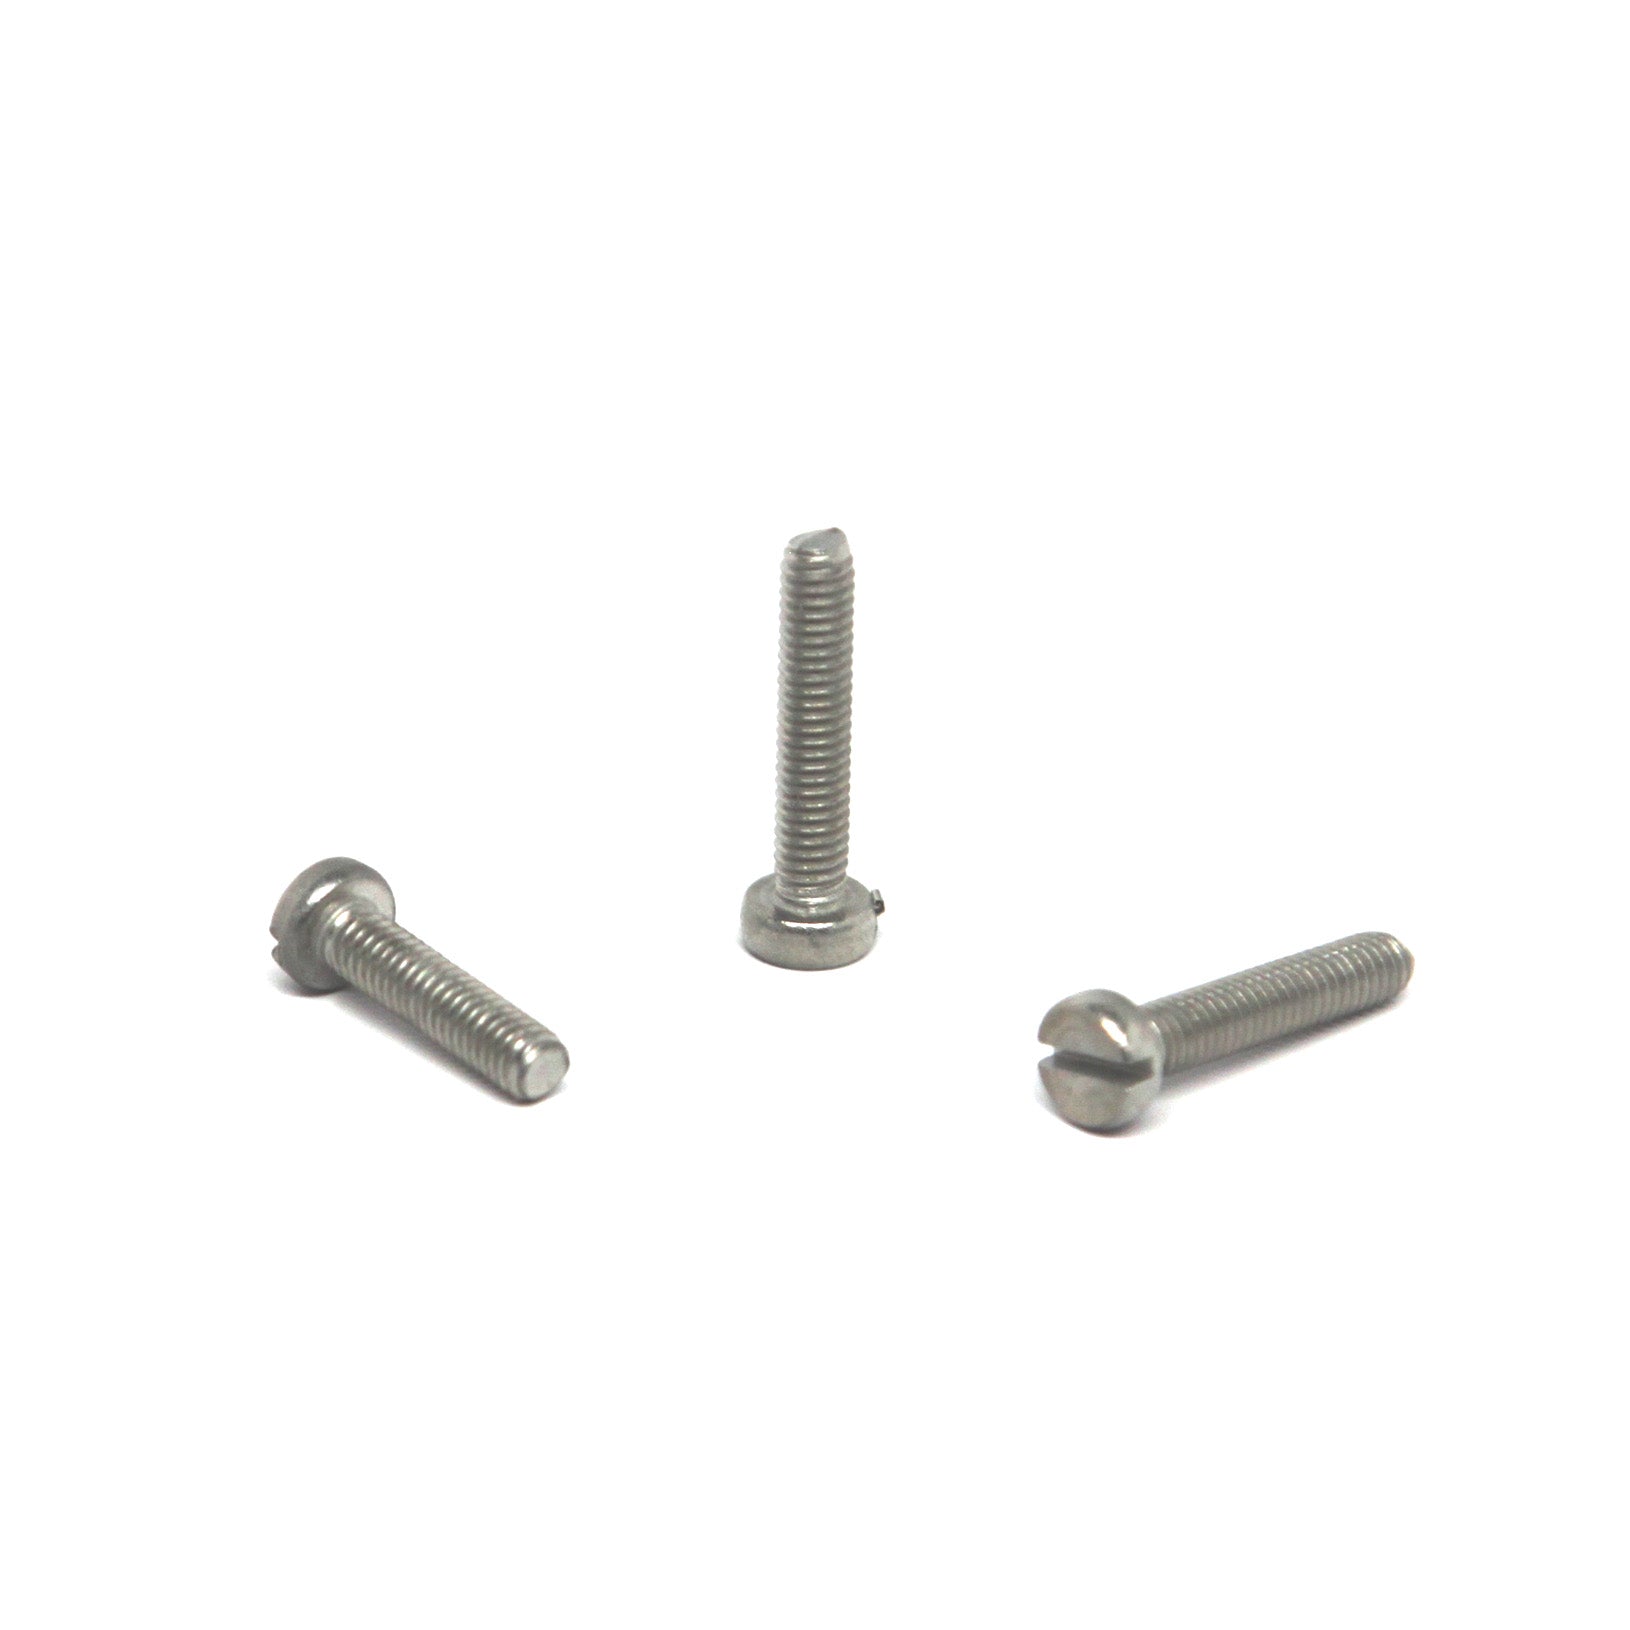 P2010 - M4x20 Stainless Steel Screw for Soap Push Button Intersan/AquaDesign